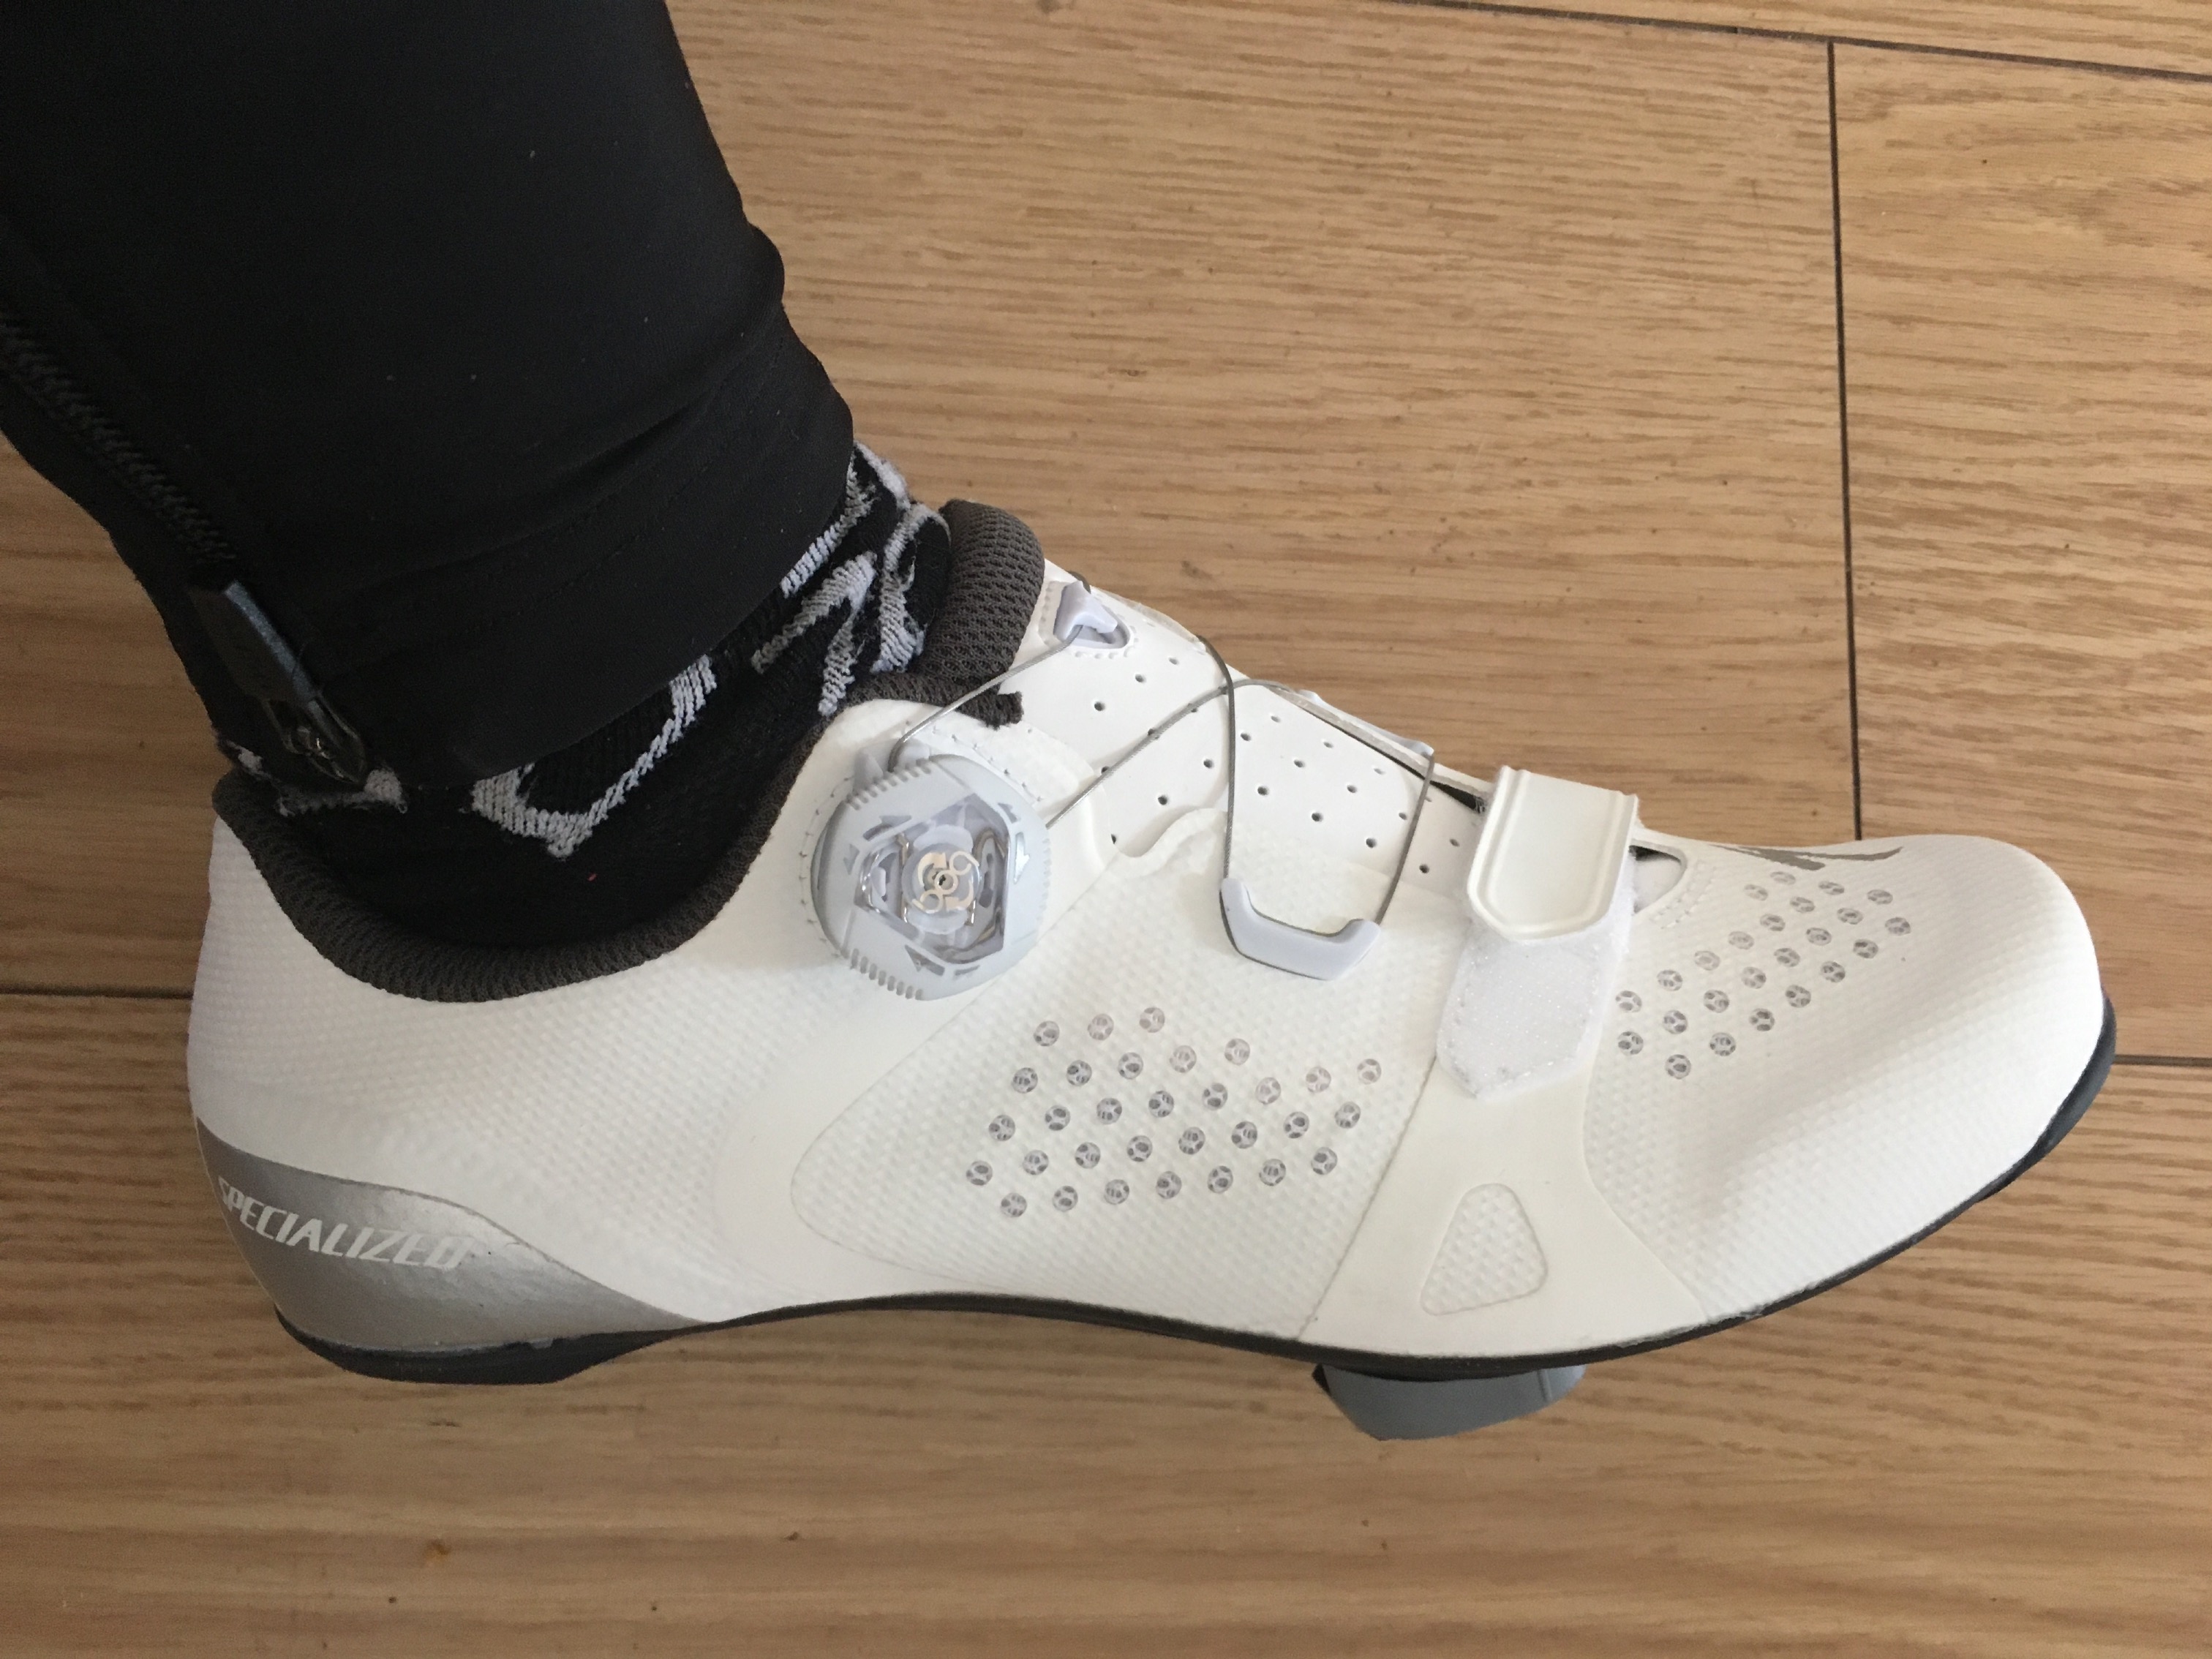 torch 2.0 road shoes review